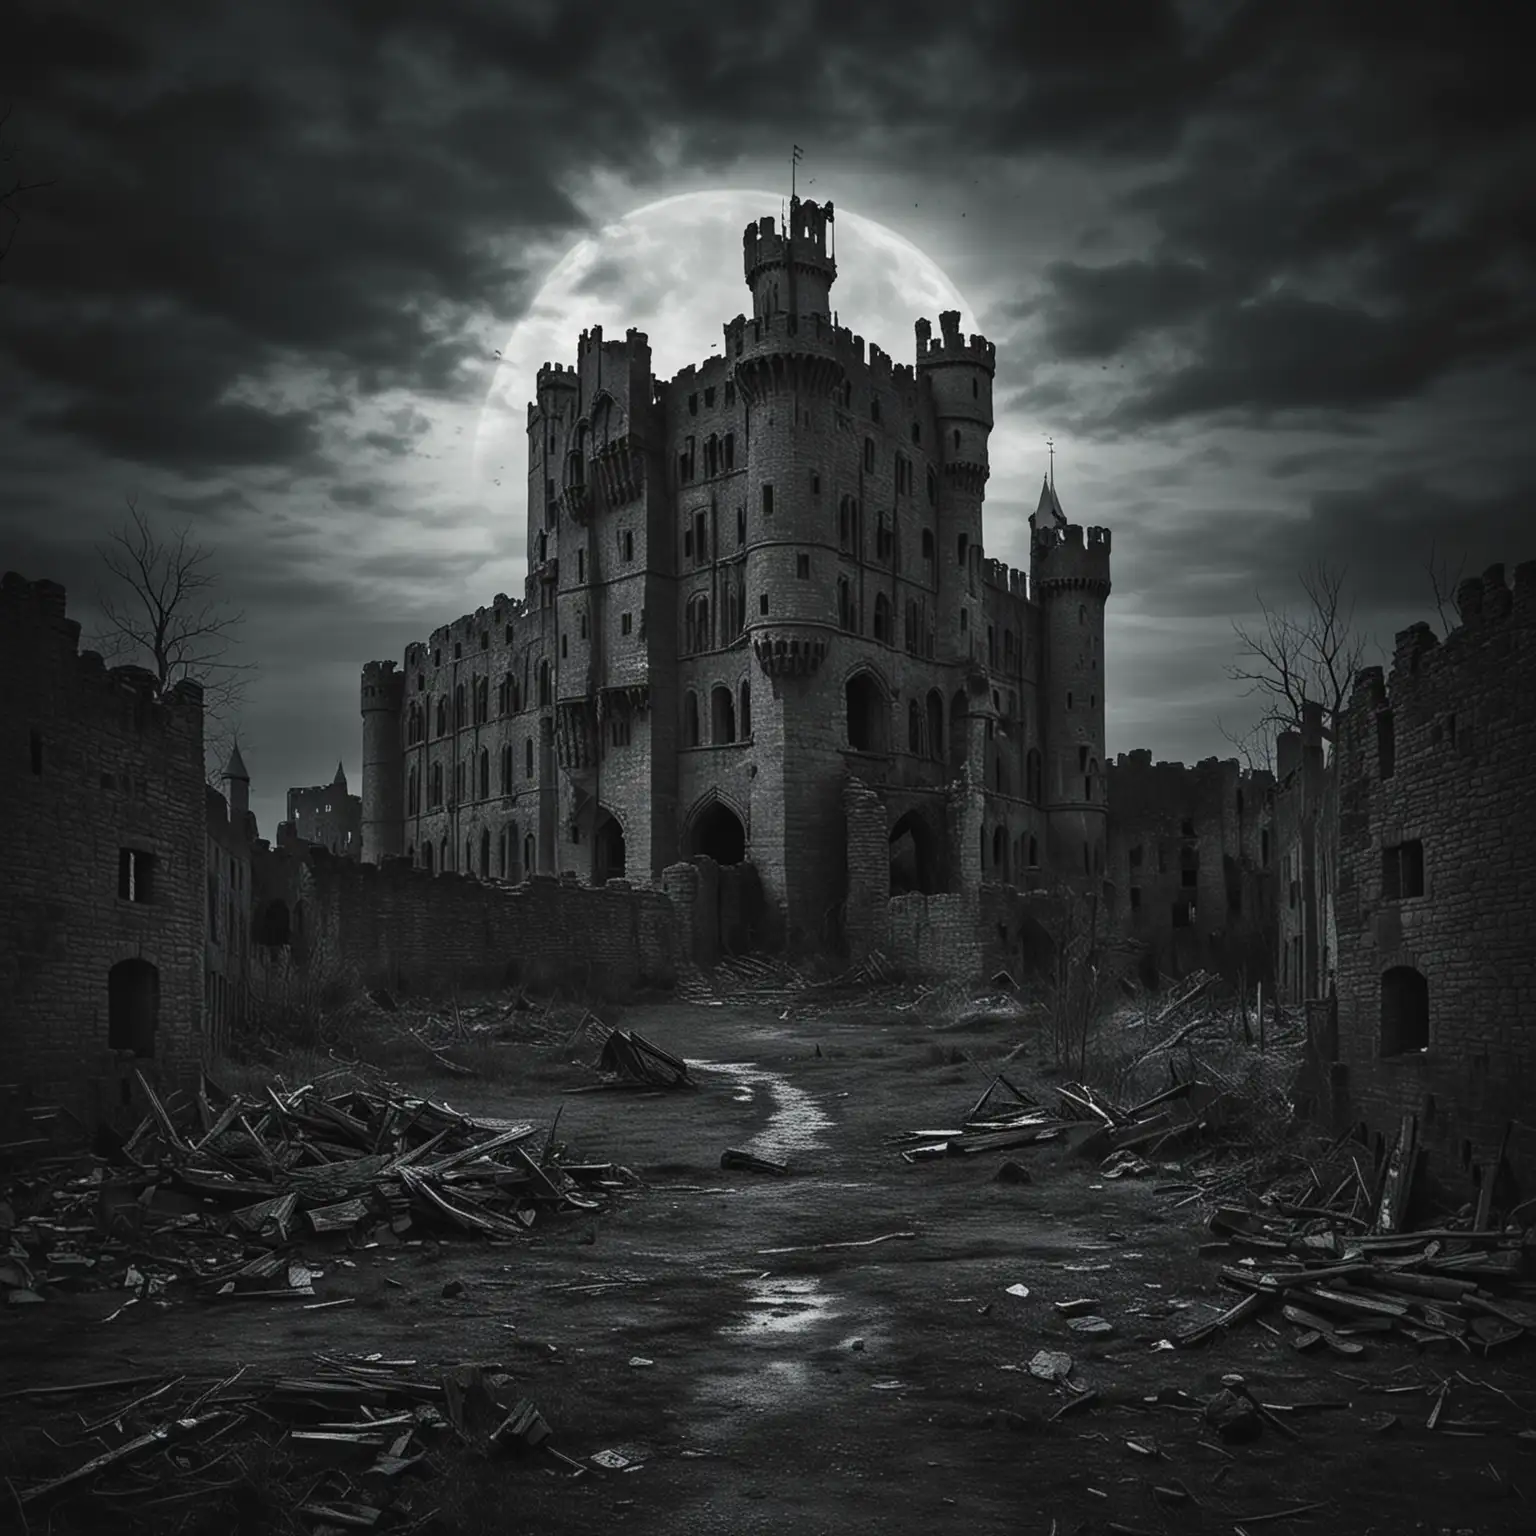 Deserted-Ancient-Castle-in-Mysterious-Darkness